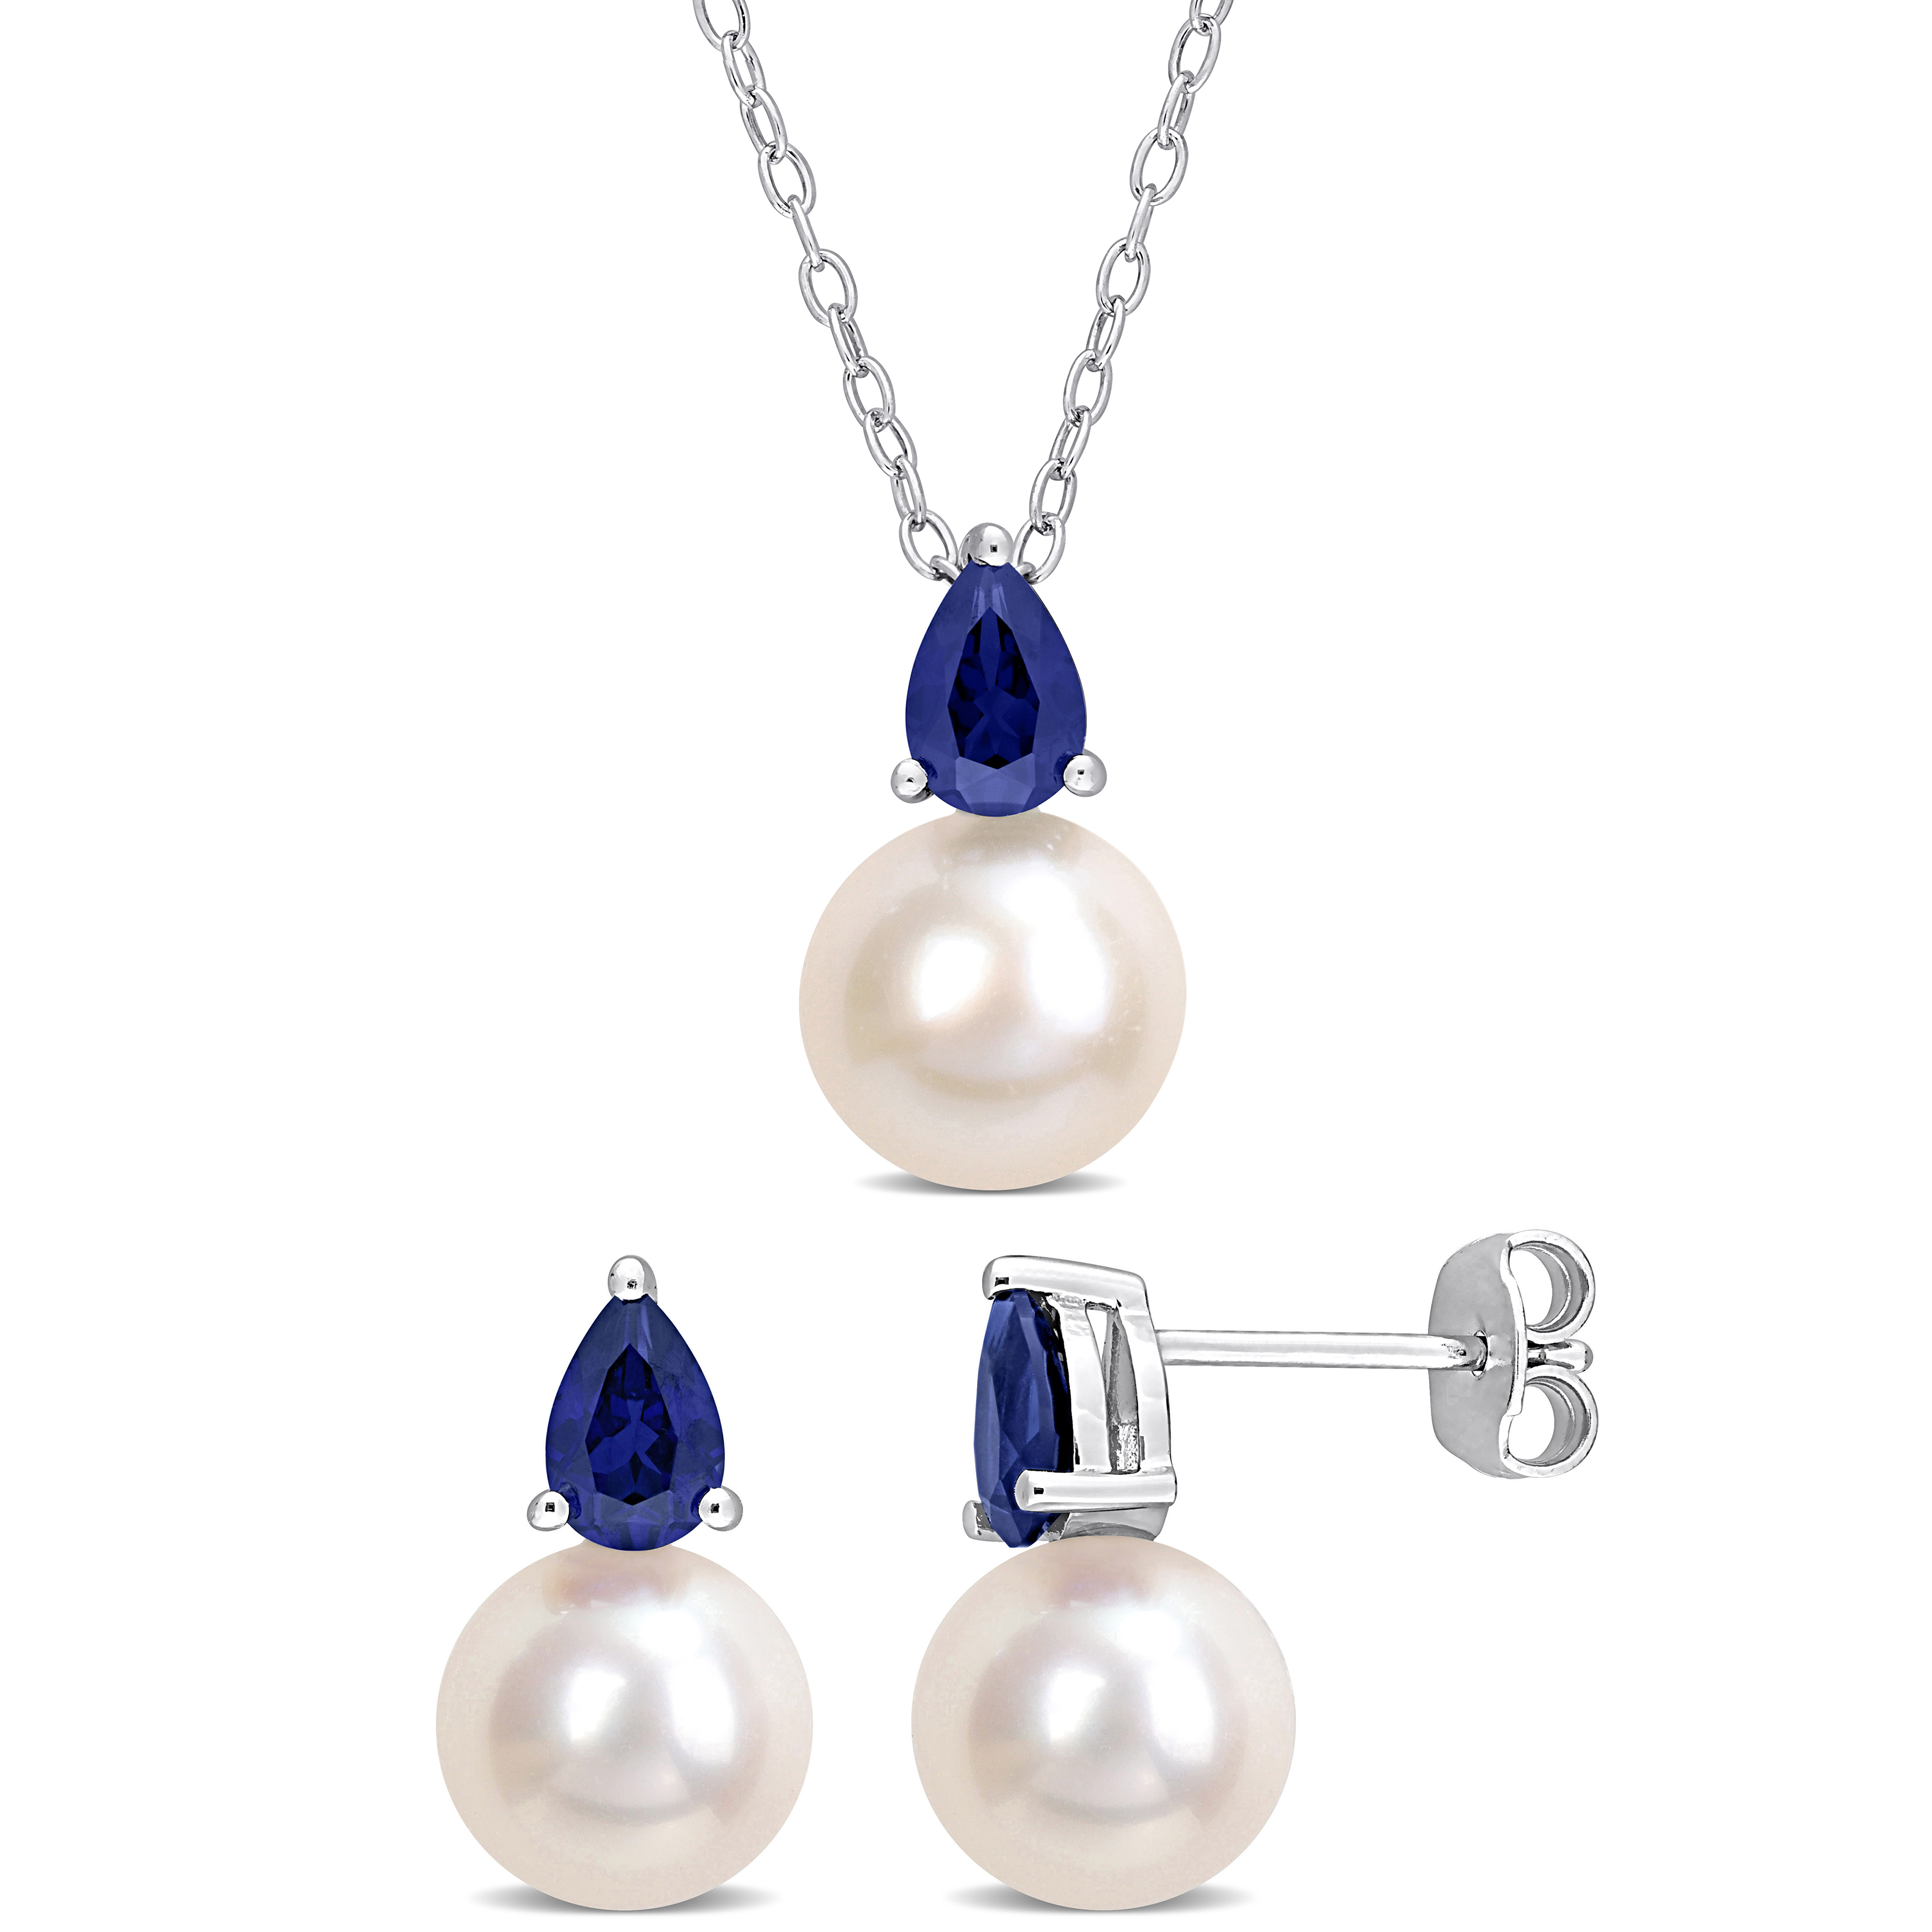 8.5-9 MM White Round Cultured Freshwater Pearl and 2 CT TGW Pear-Cut Created Blue Sapphire 2-Piece Drop Necklace and Earrings Set in Sterling Silver